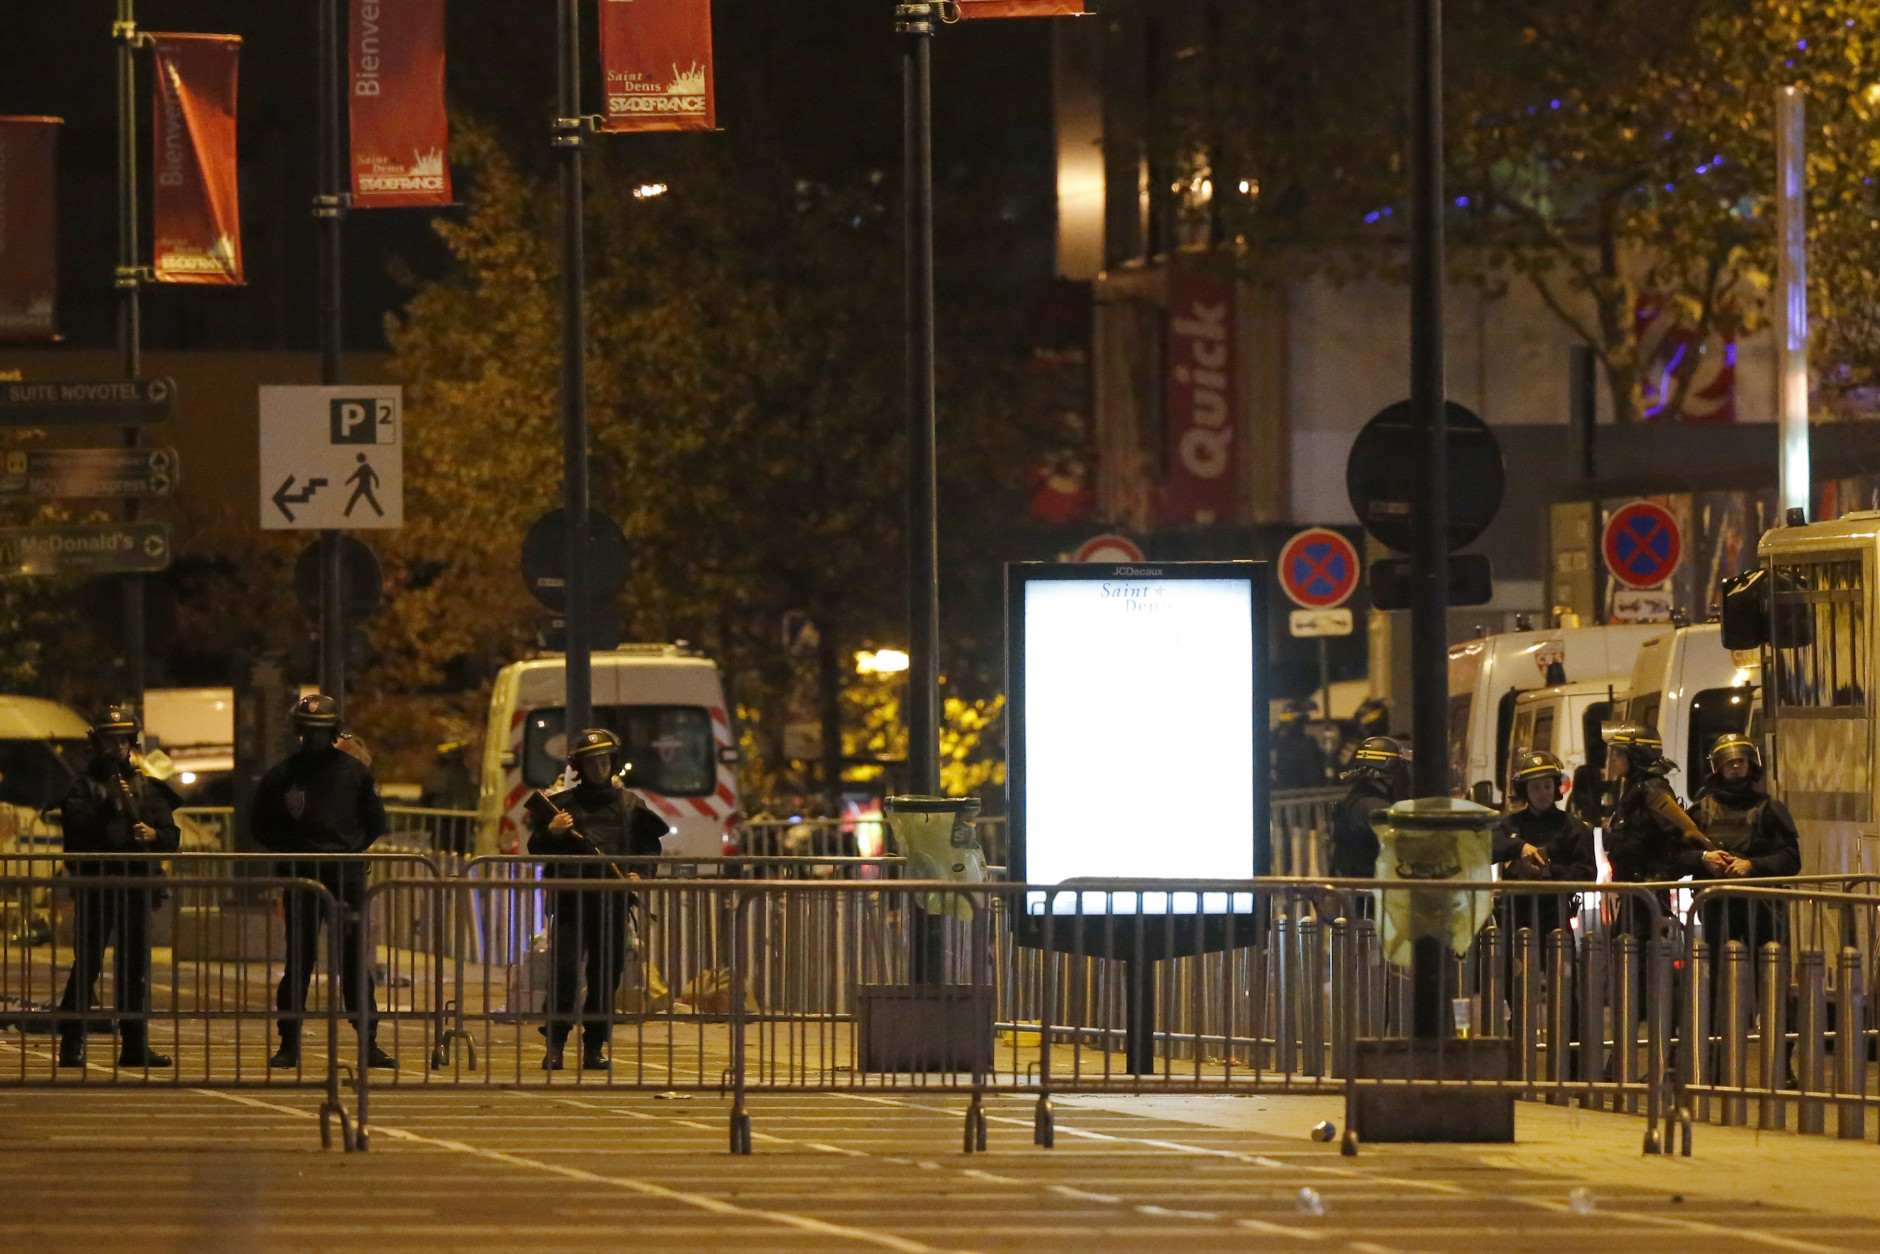 Police officers secure a street outside the Stade de France stadium after the international friendly soccer France against Germany, Friday, Nov. 13, 2015 in Saint Denis, outside Paris. Two police officials say that at least 26 people have been killed in shootings and explosions around Paris, in the deadliest violence in France in decades. (AP Photo/Michel Euler)